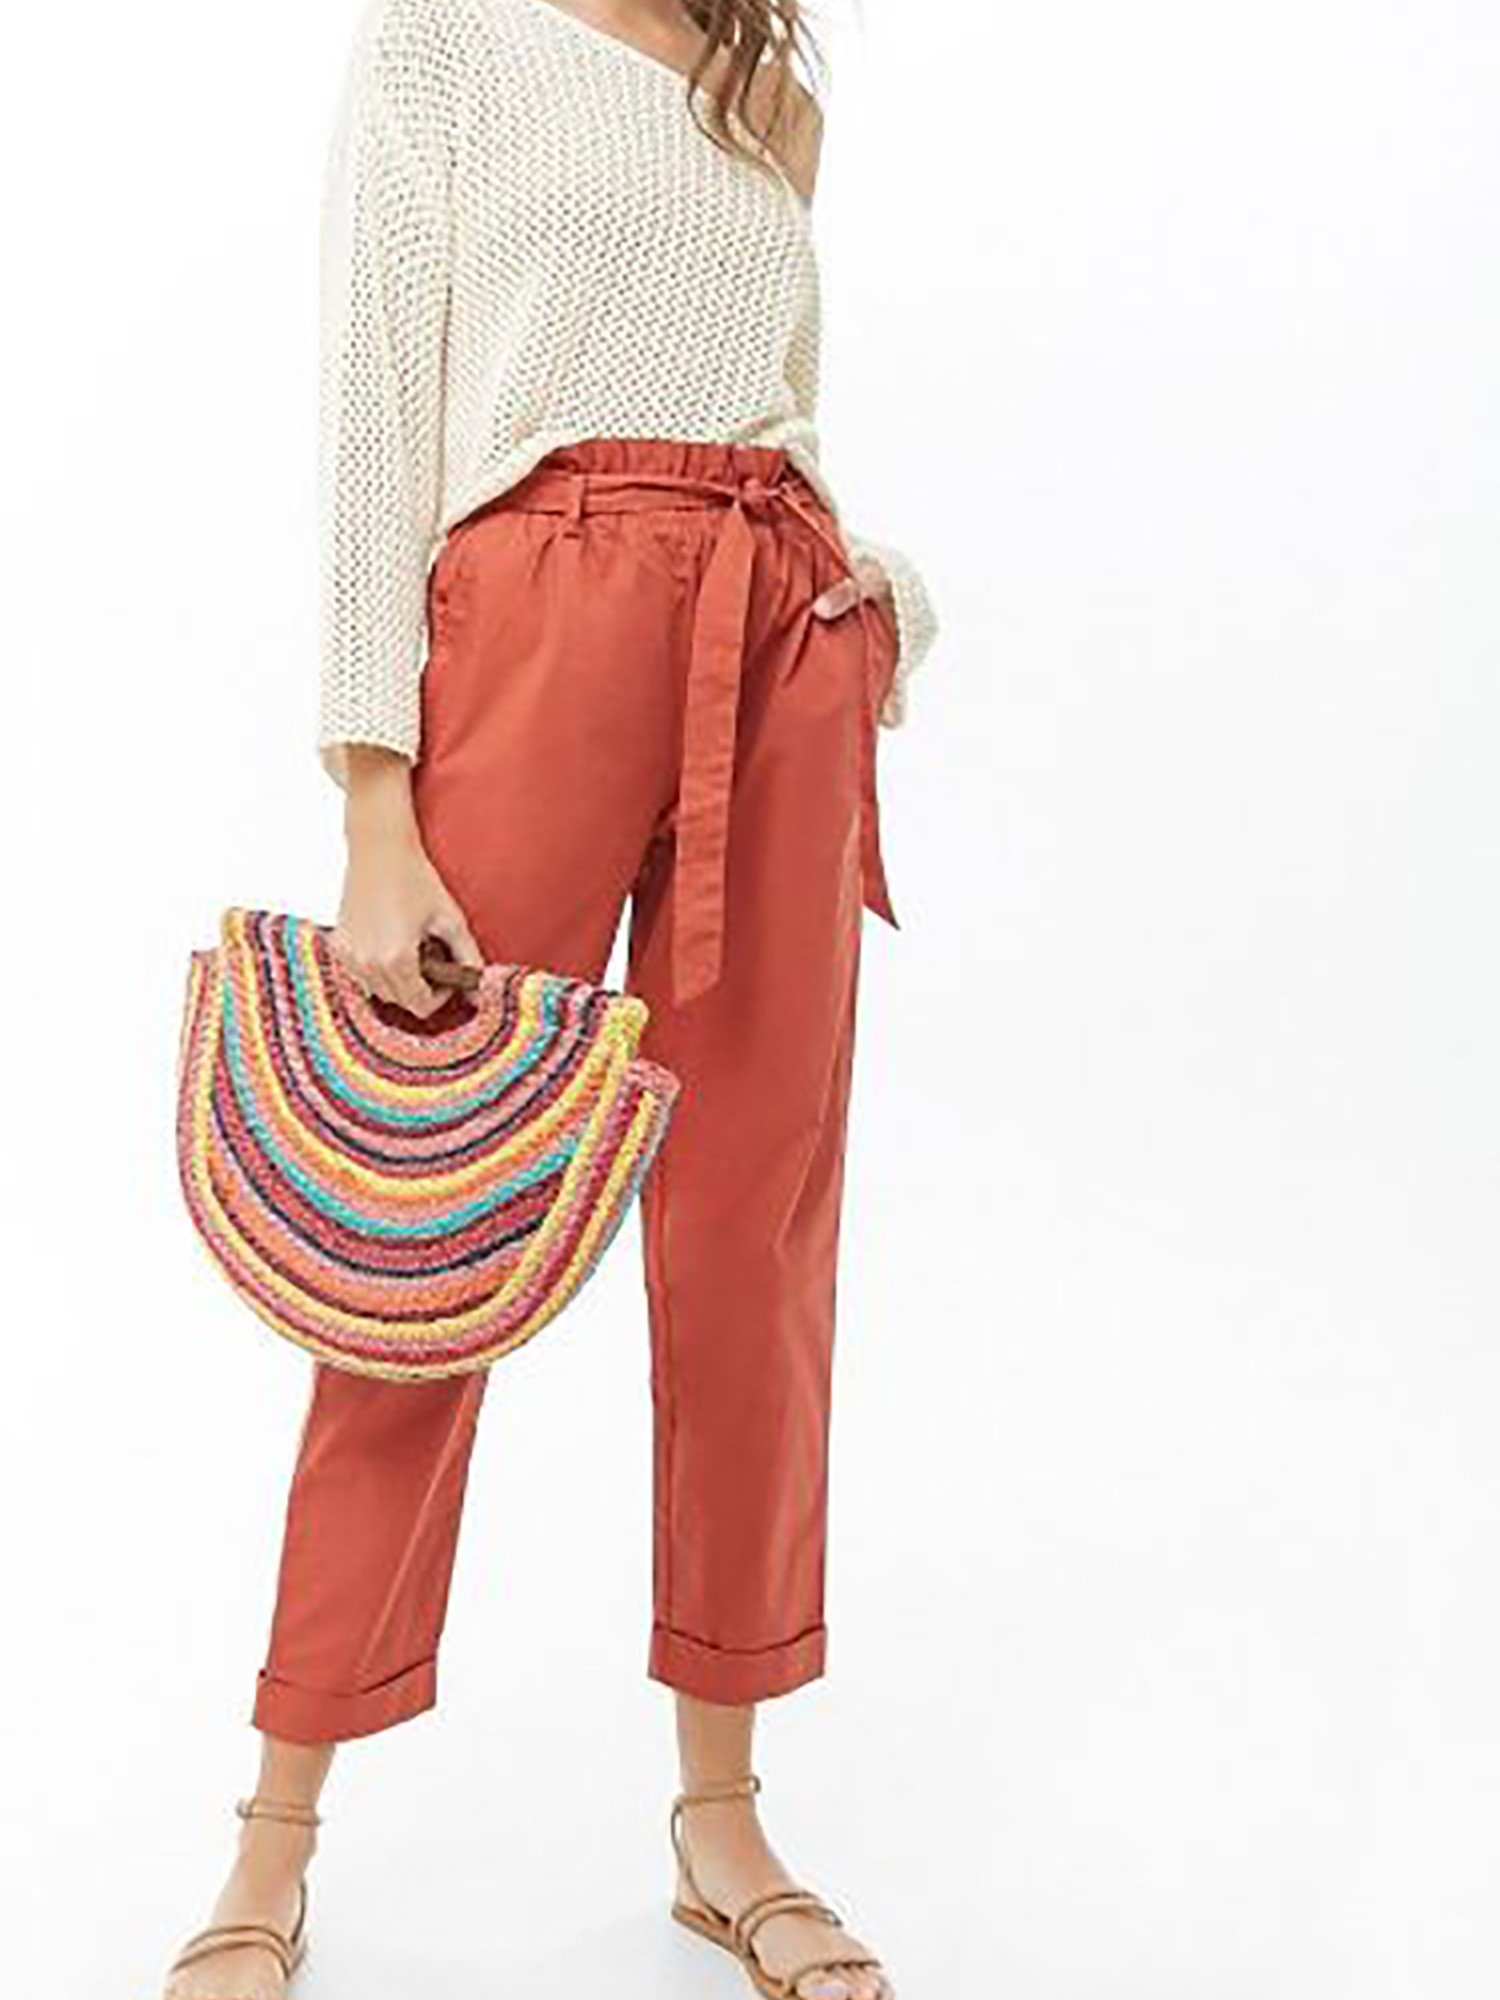 18 best wrap pants of 2022 according to shoppers